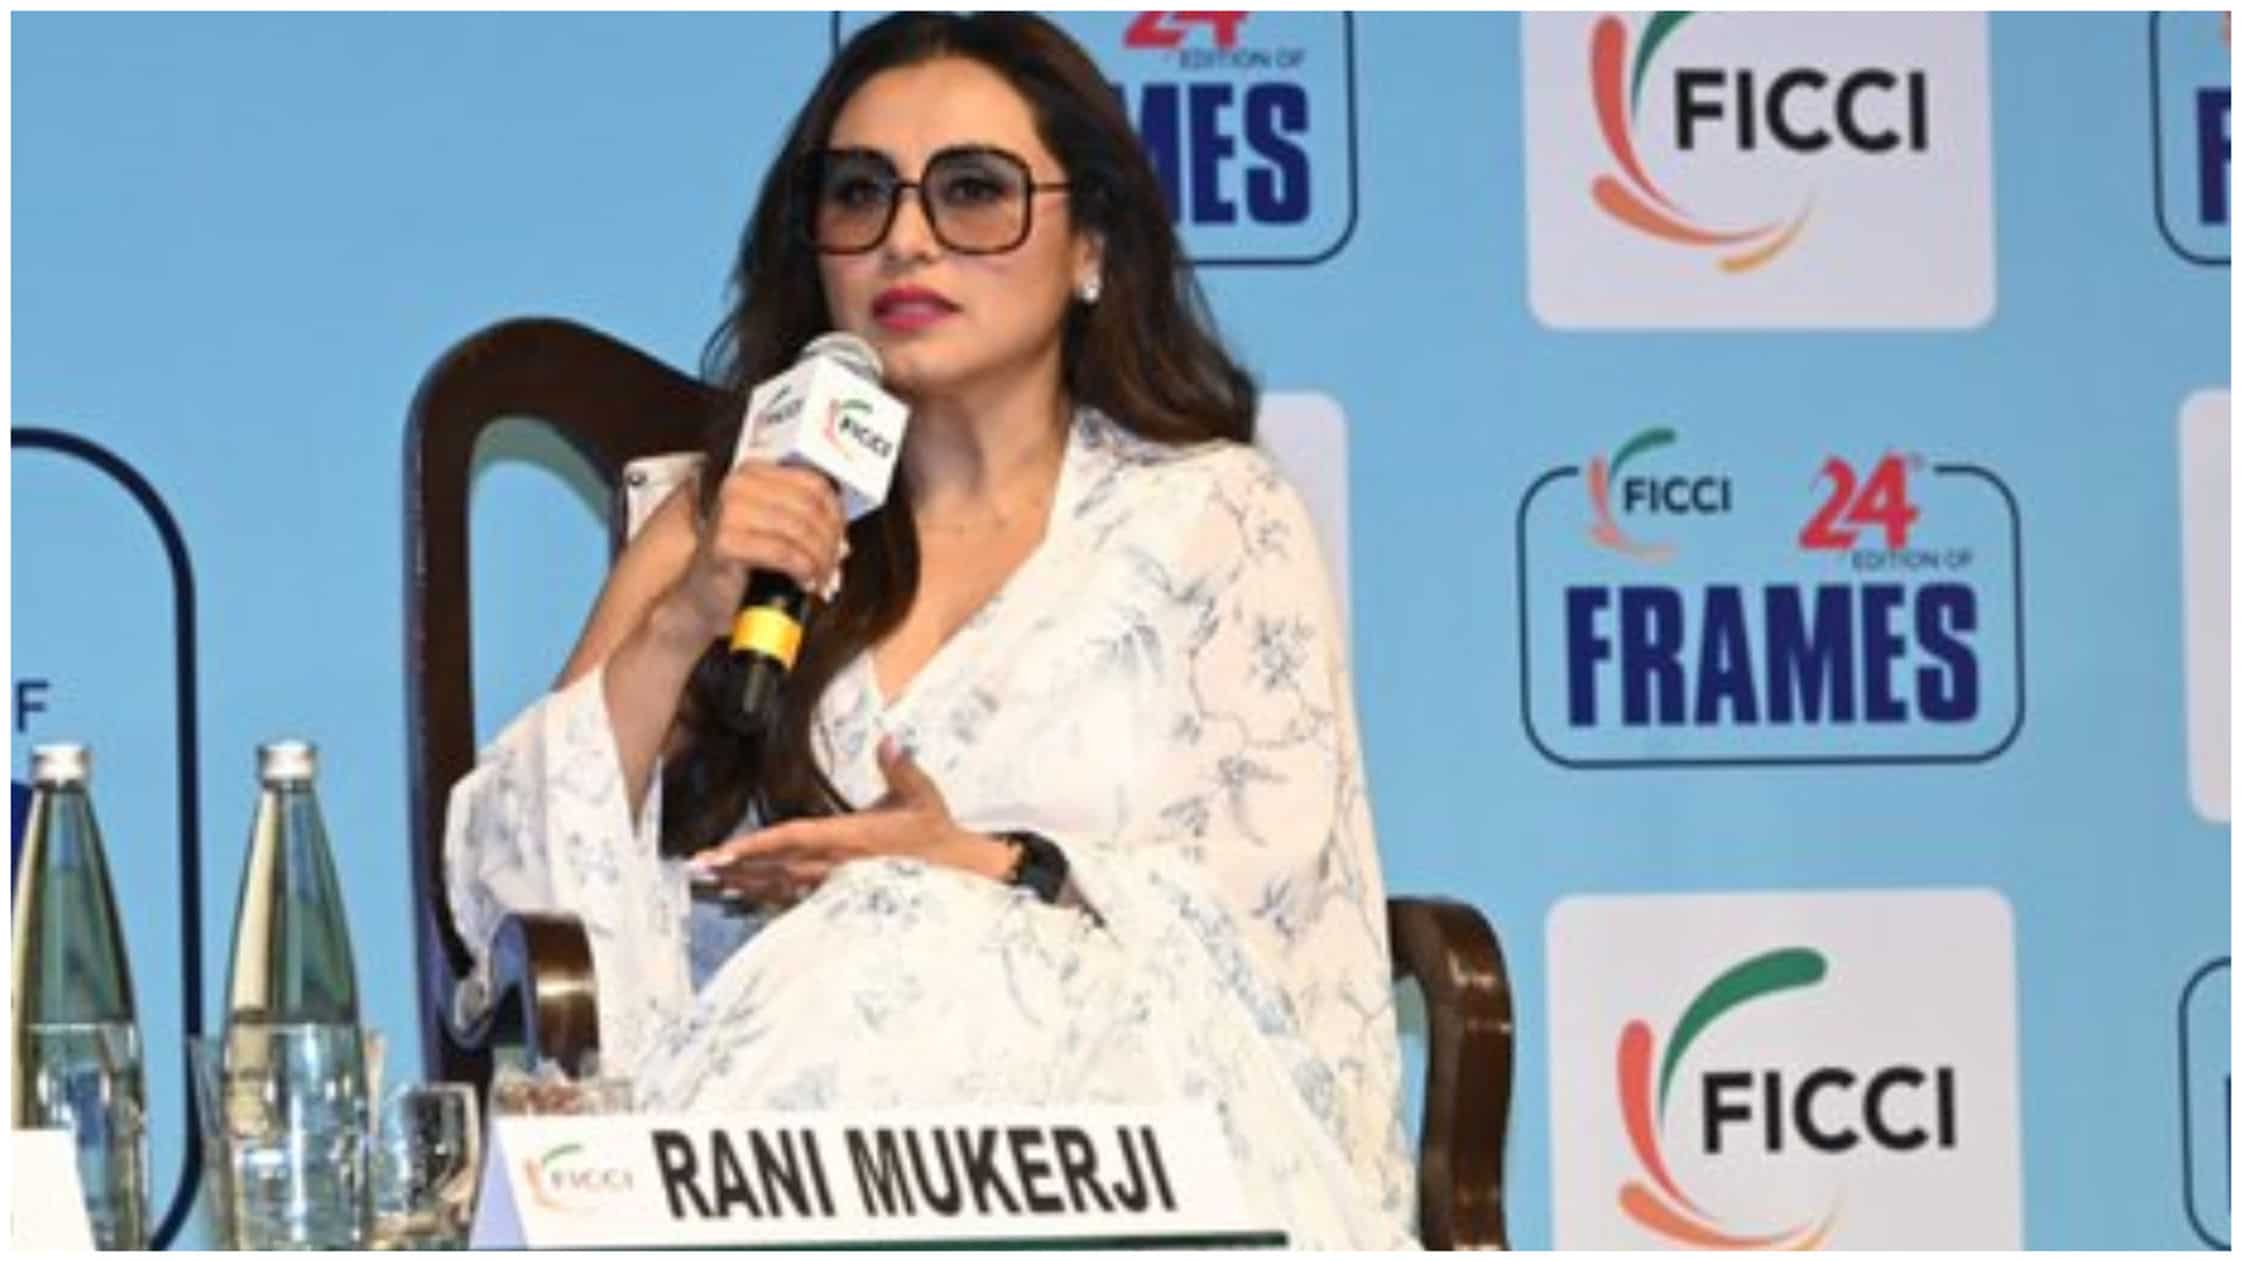 https://www.mobilemasala.com/film-gossip/Know-why-Rani-Mukerji-said-that-filmmakers-based-in-south-India-listen-to-what-the-audiences-want-i221097